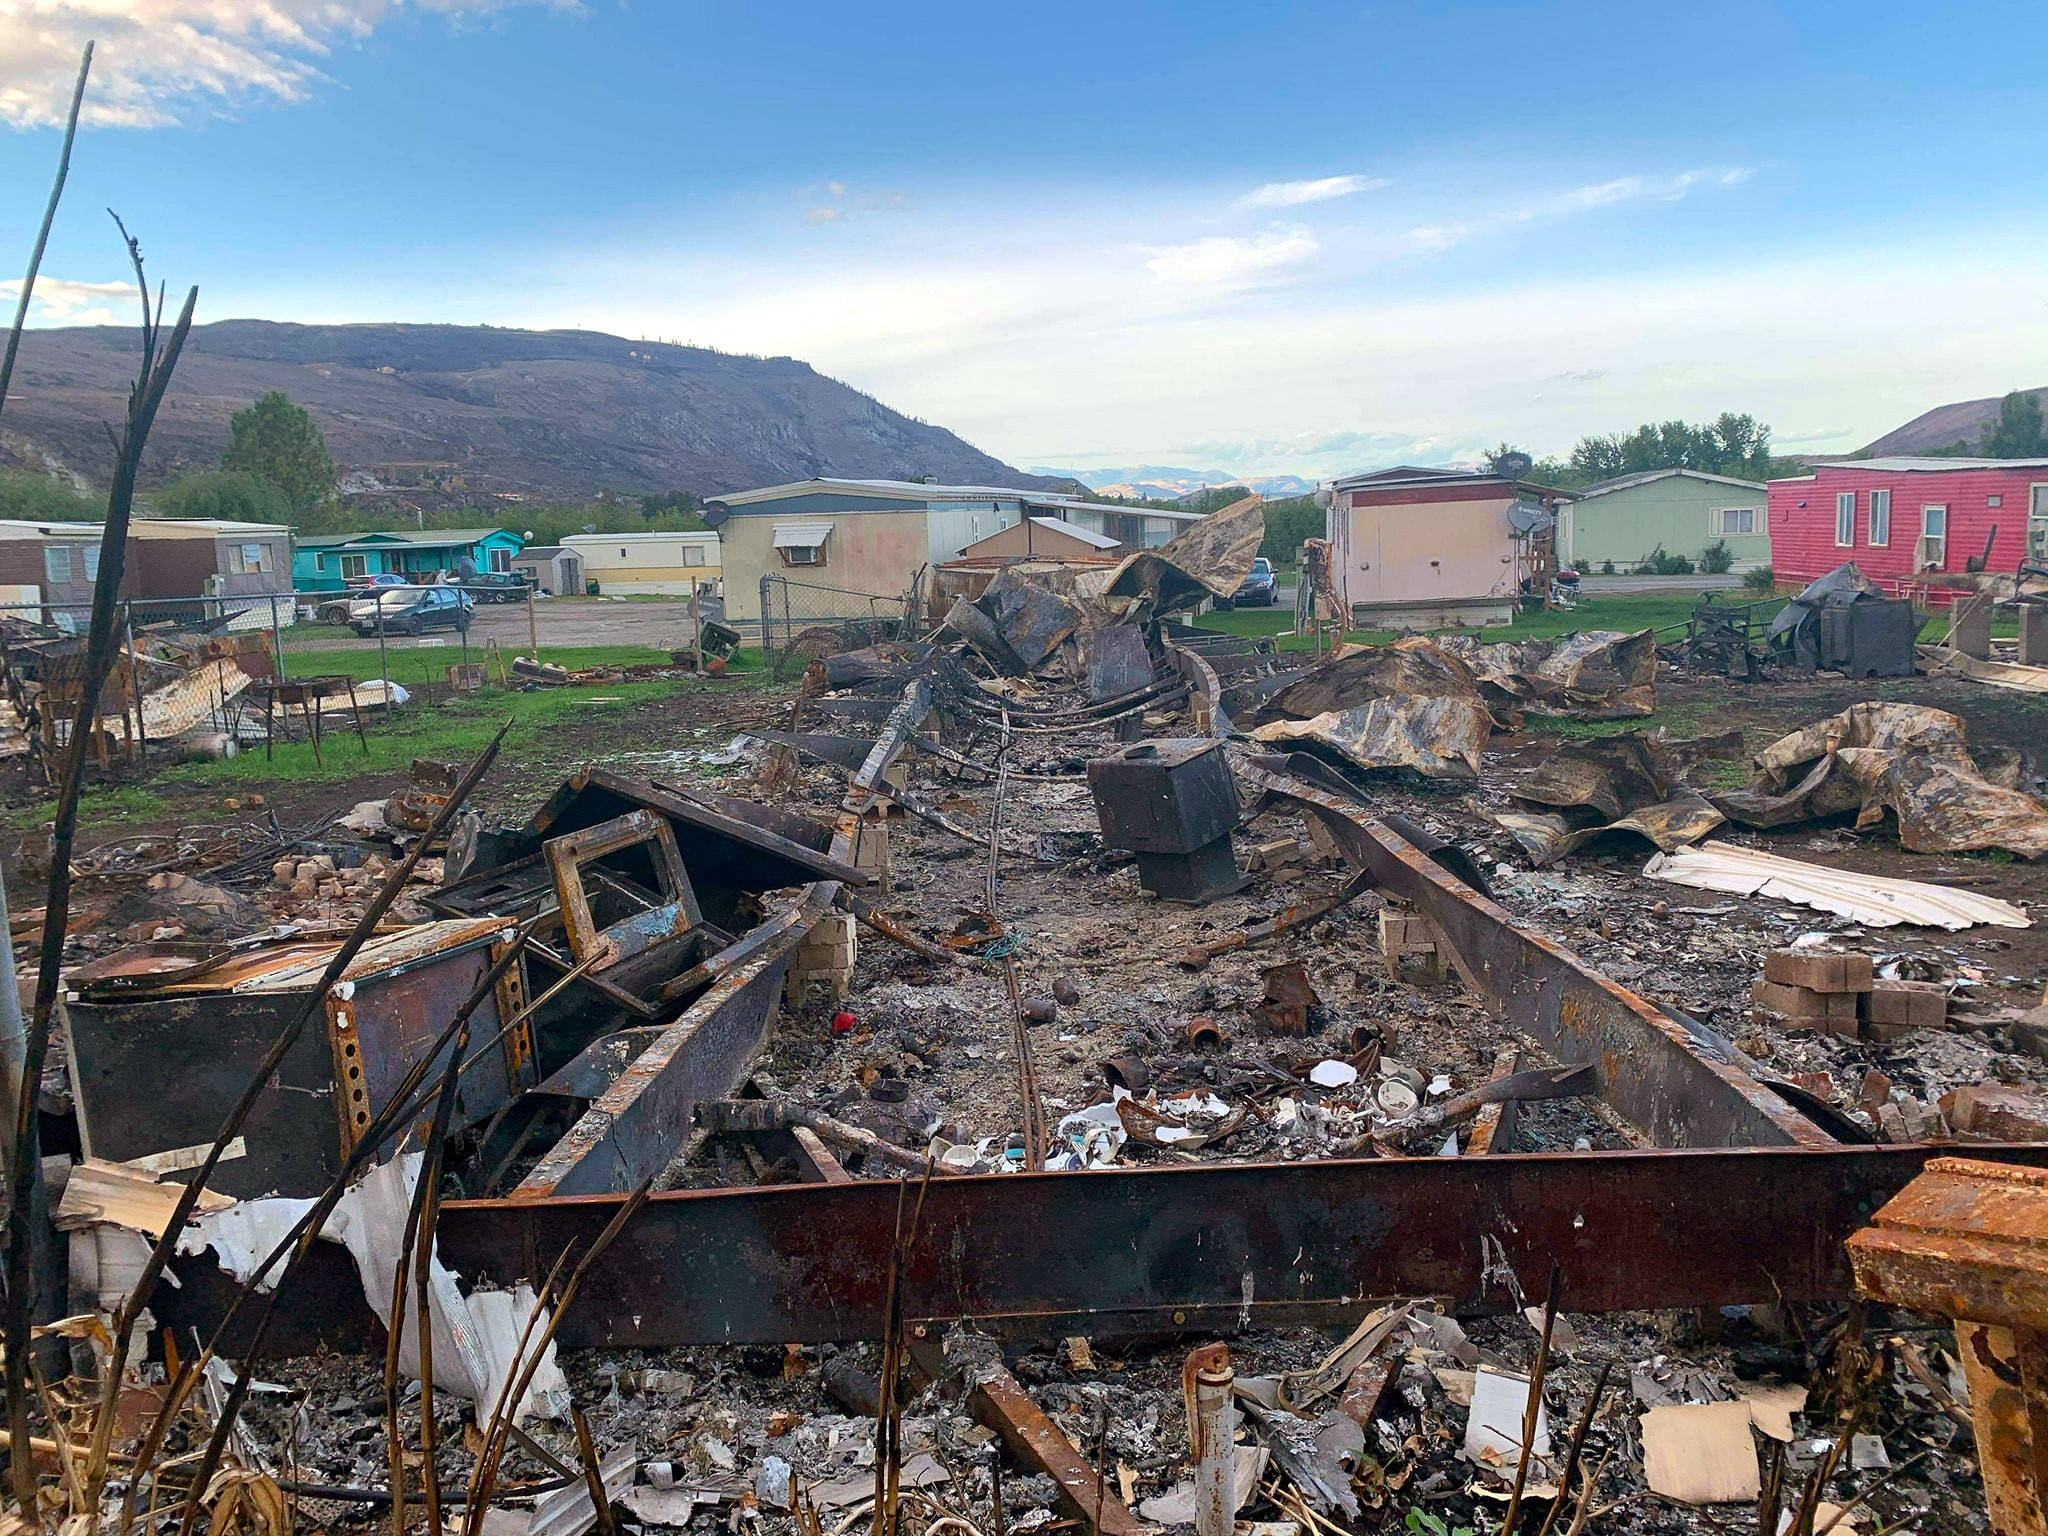 Photo courtesy of Penelope Varn A bent frame is all that is remains of a mobile home in Bridgeport that was ravaged by the Pearl Hill Fire in early September. A local Montesano couple donated a fifth-wheel trailer so the family affected by the fire could avoid homelessness.